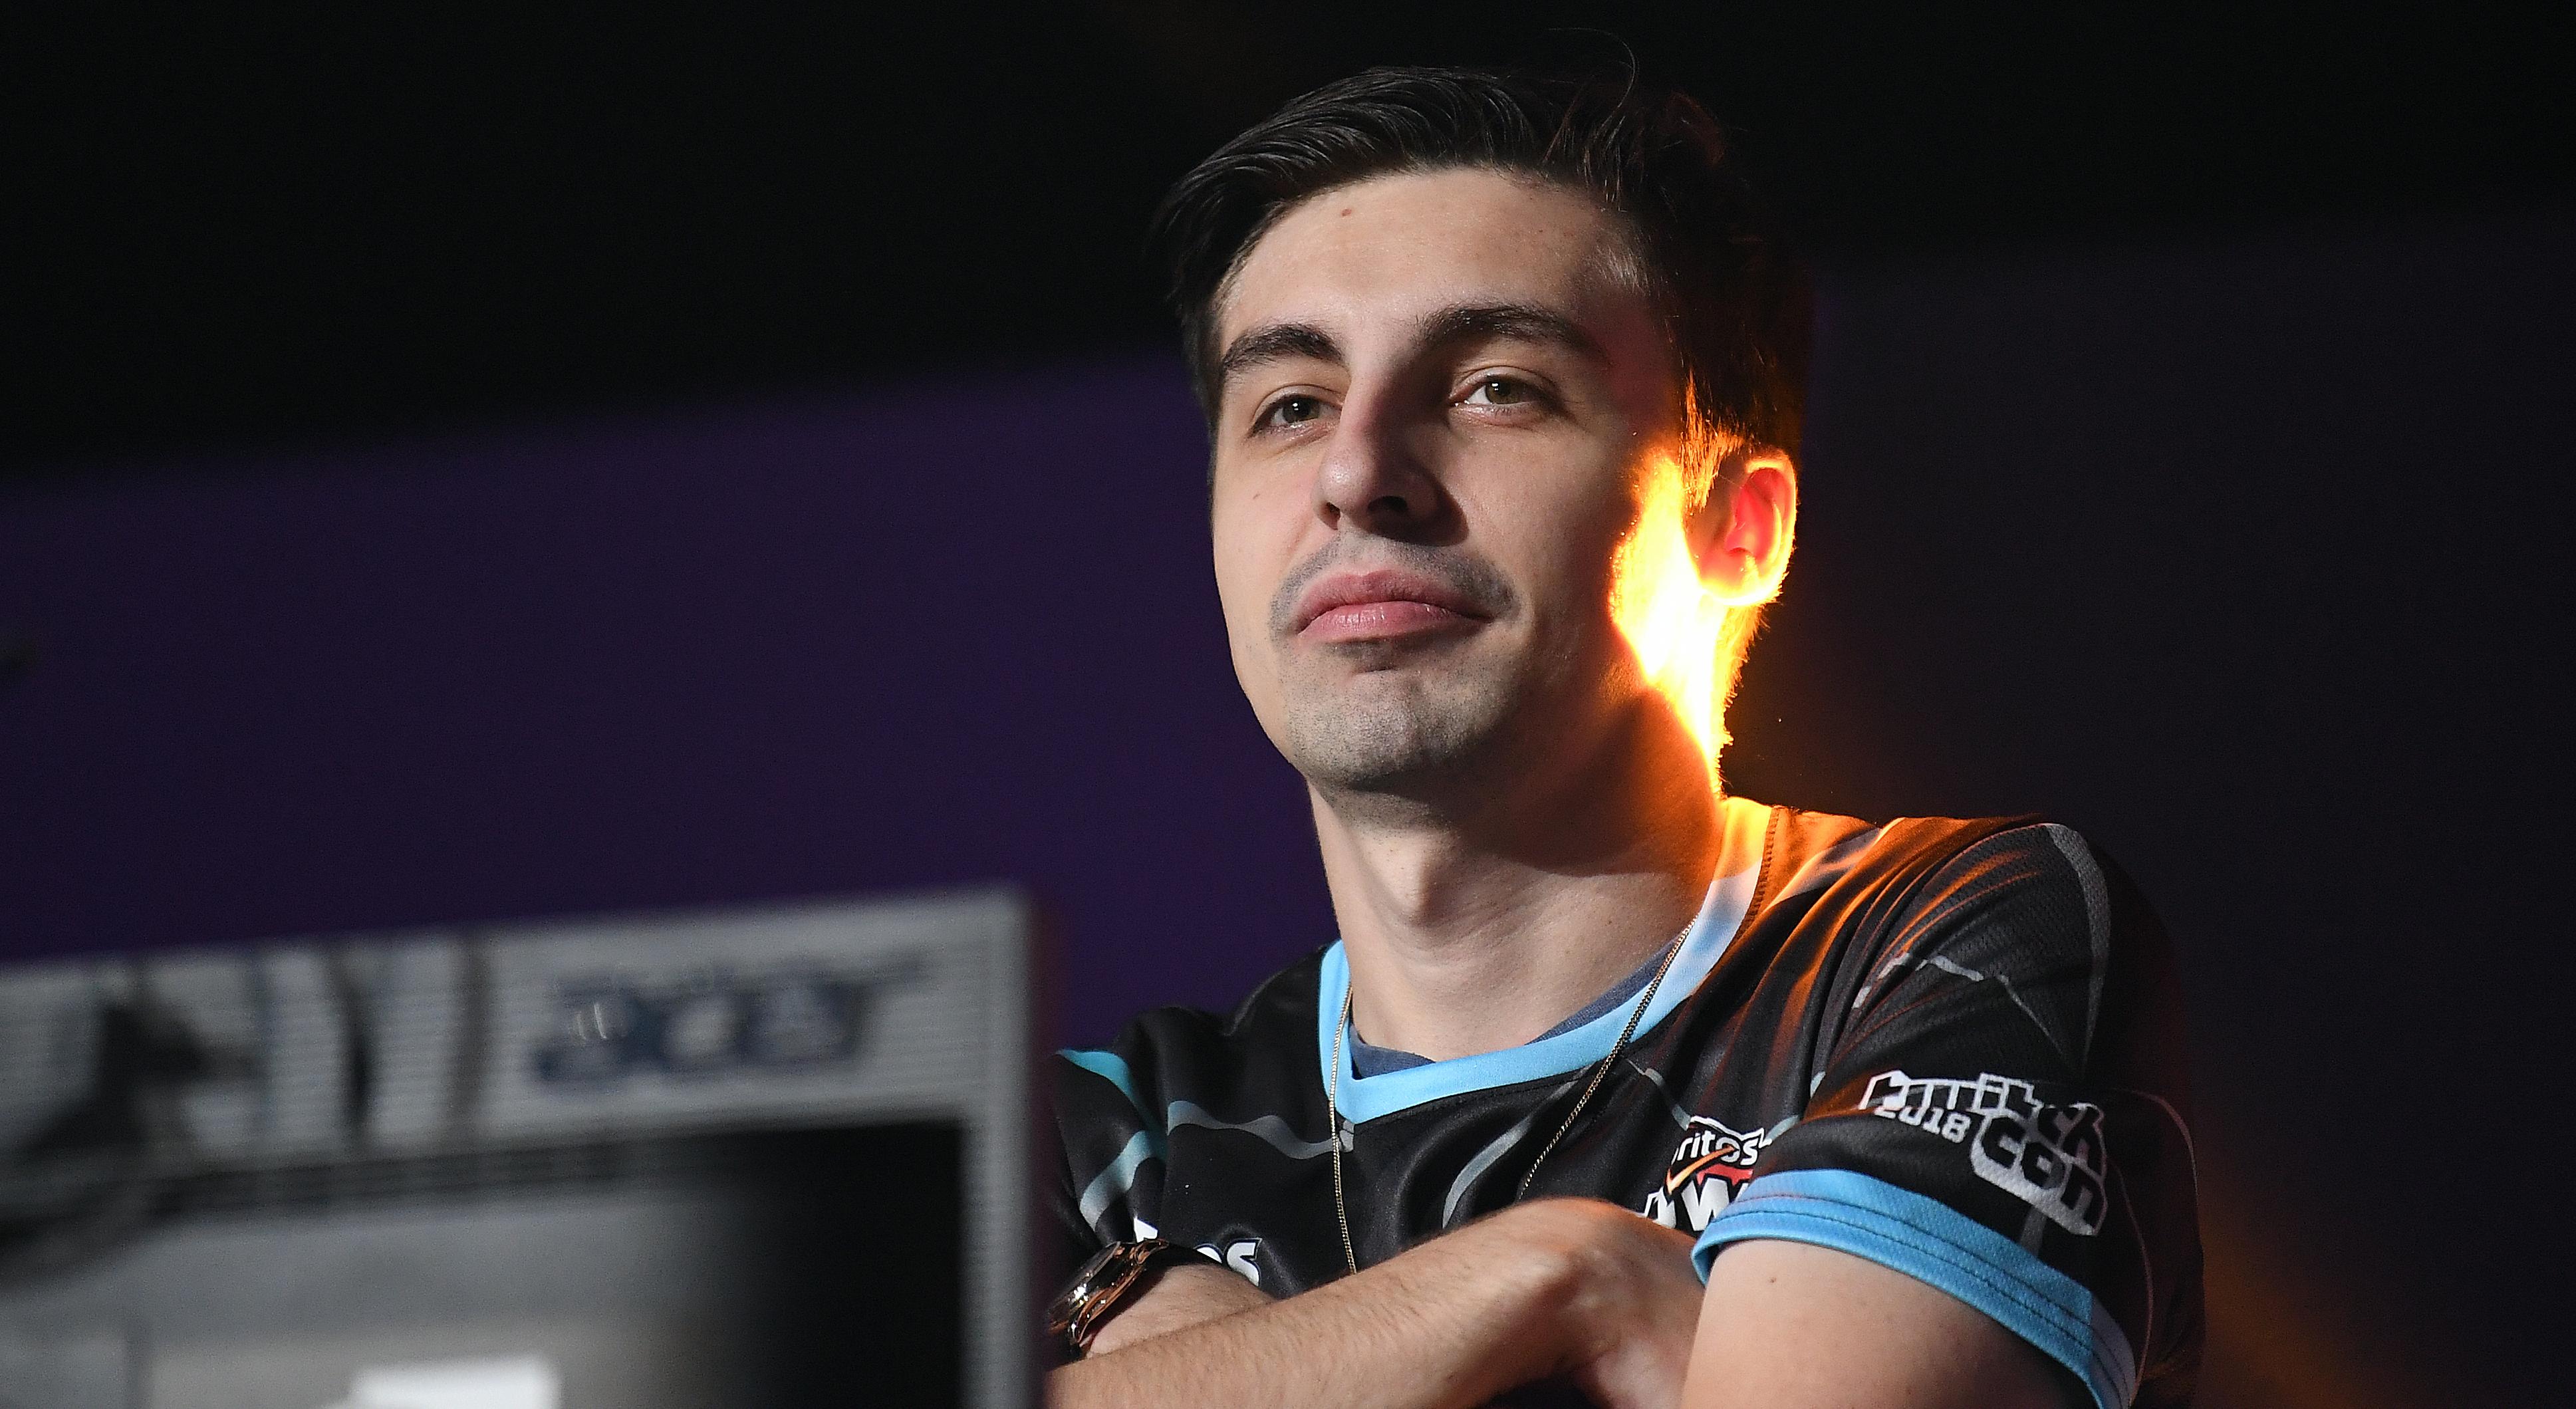 Shroud Is Returning to Twitch After Streaming Platform Mixer Goes Under